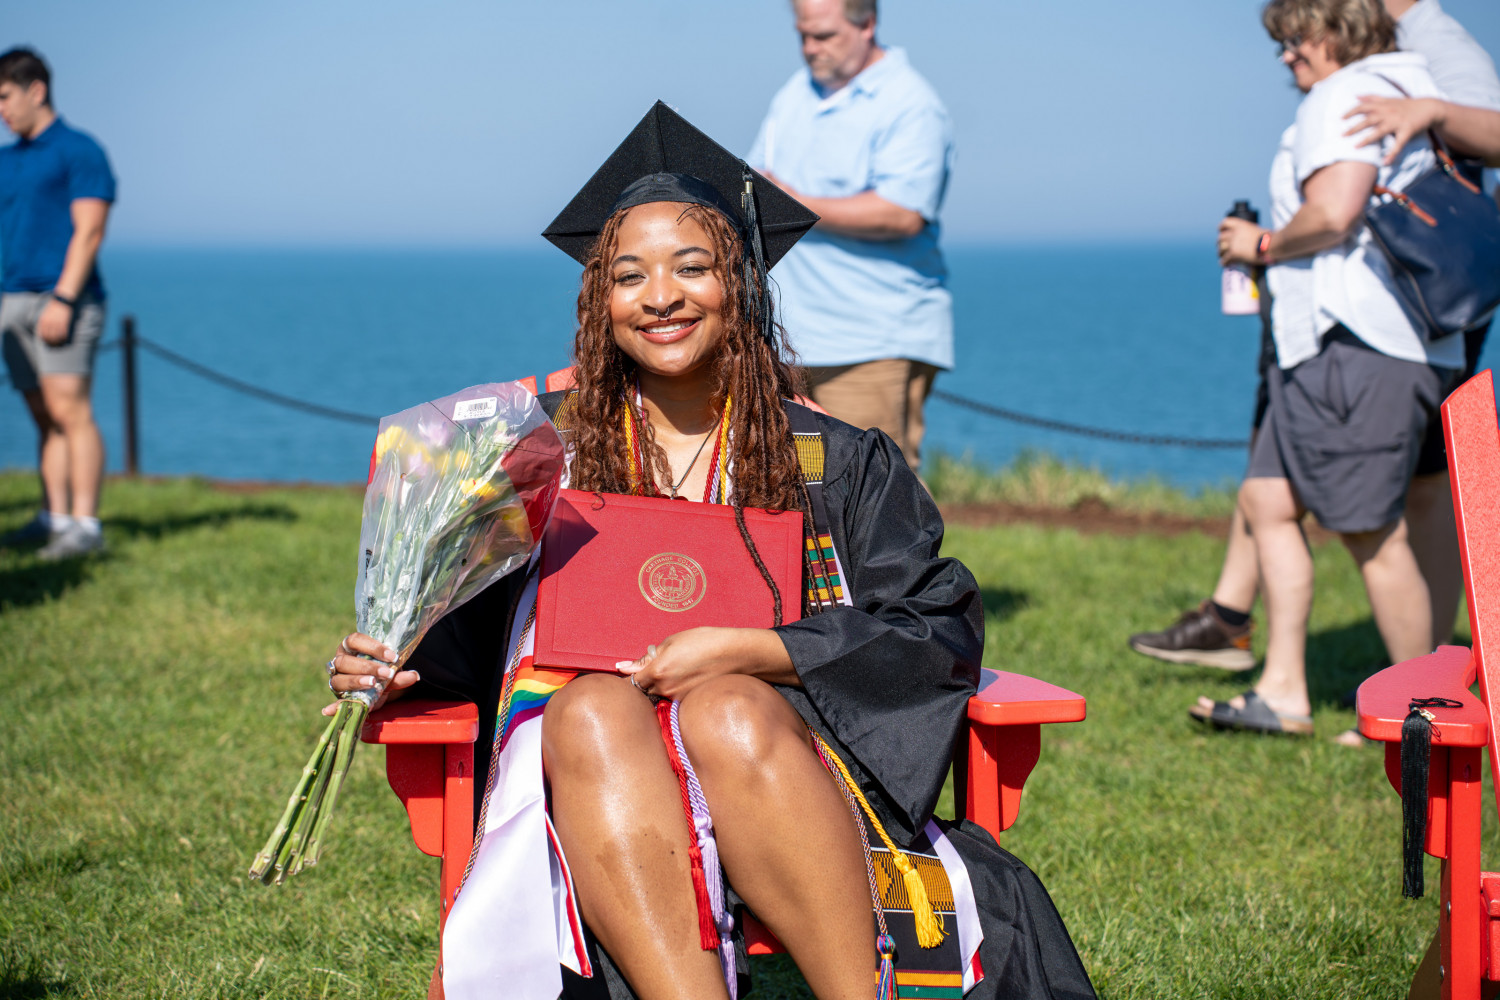 Students sat in the iconic red Adirondack chairs with their diplomas.